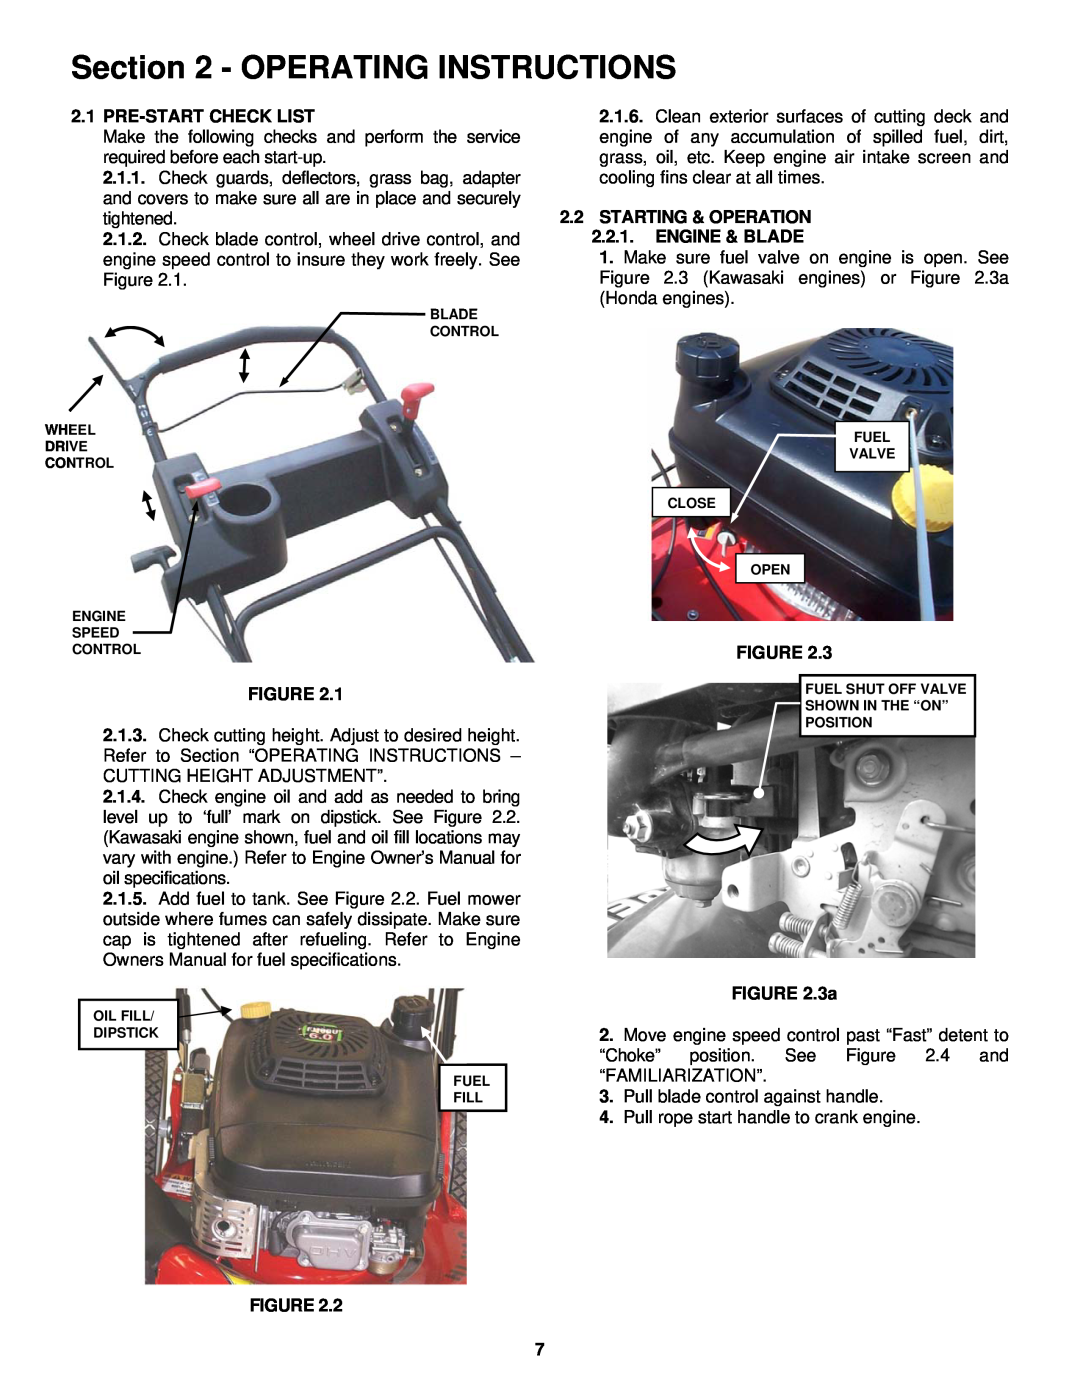 Snapper CP215019KW, CP215519HV Operating Instructions, Pre-Start Check List, STARTING & OPERATION 2.2.1. ENGINE & BLADE 